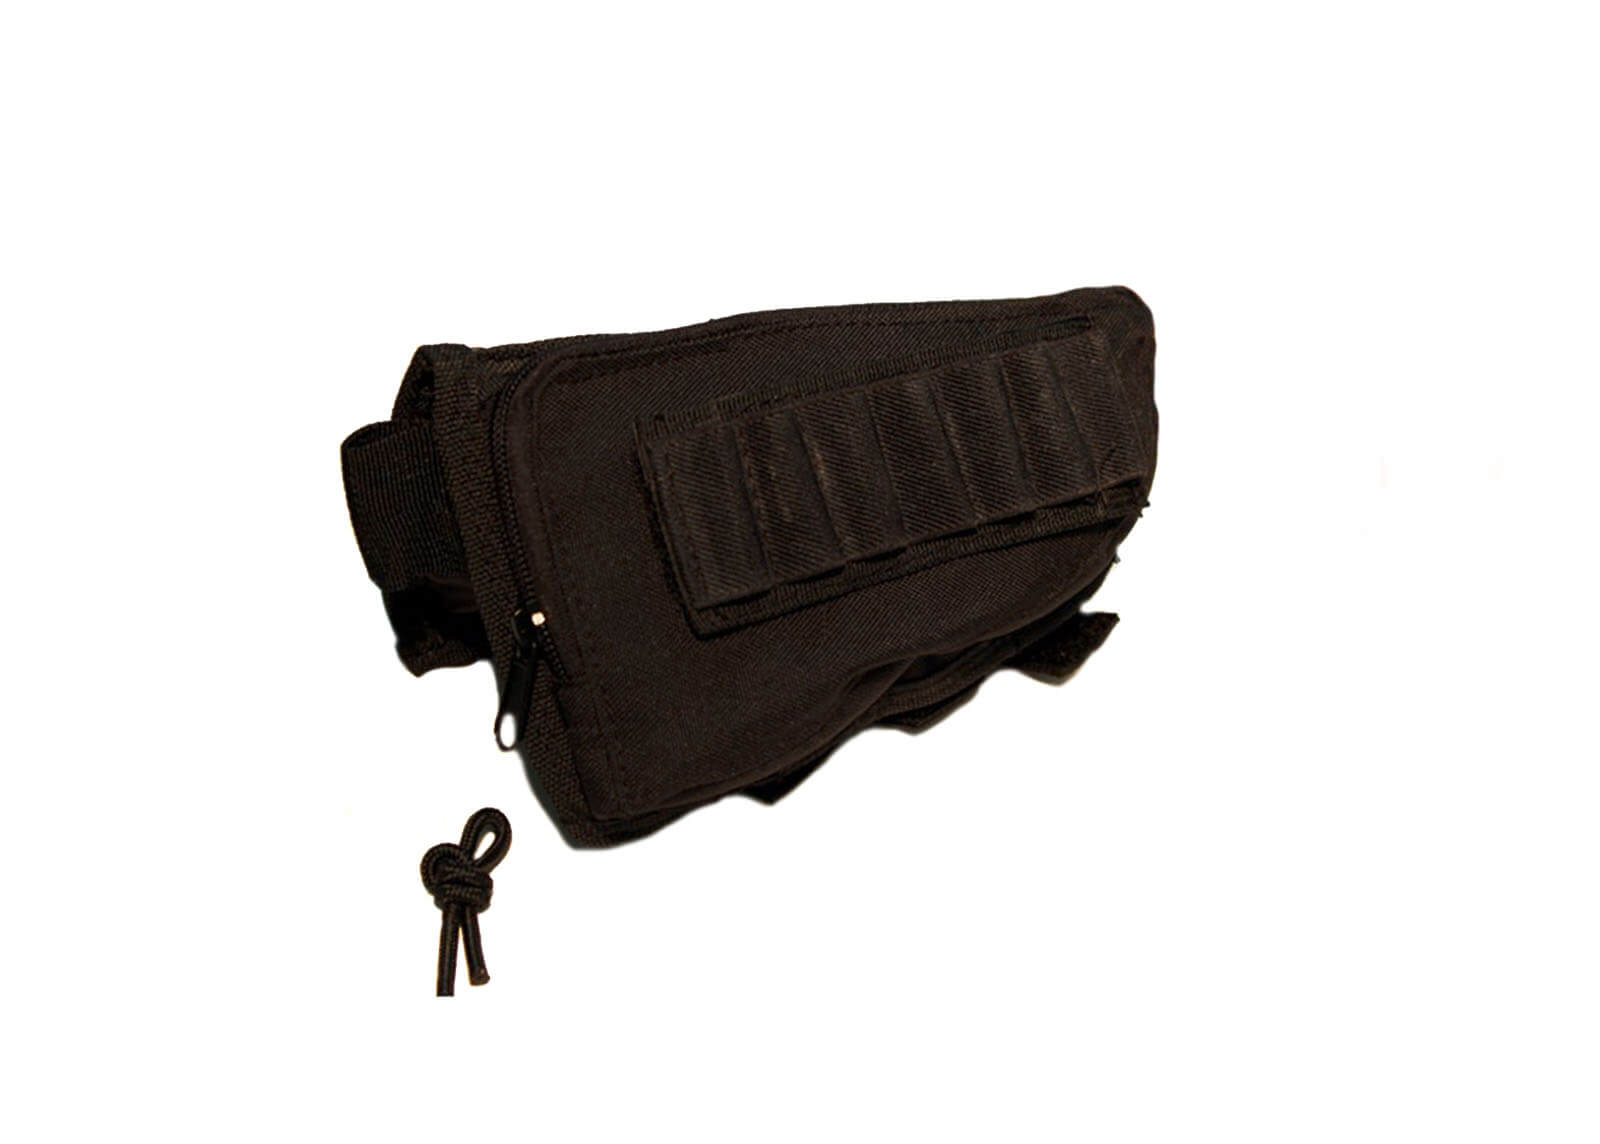 Rifle Stock Ammo Pouch with Cheek Leather Pad (BLK) - Modify Airsoft Accessories